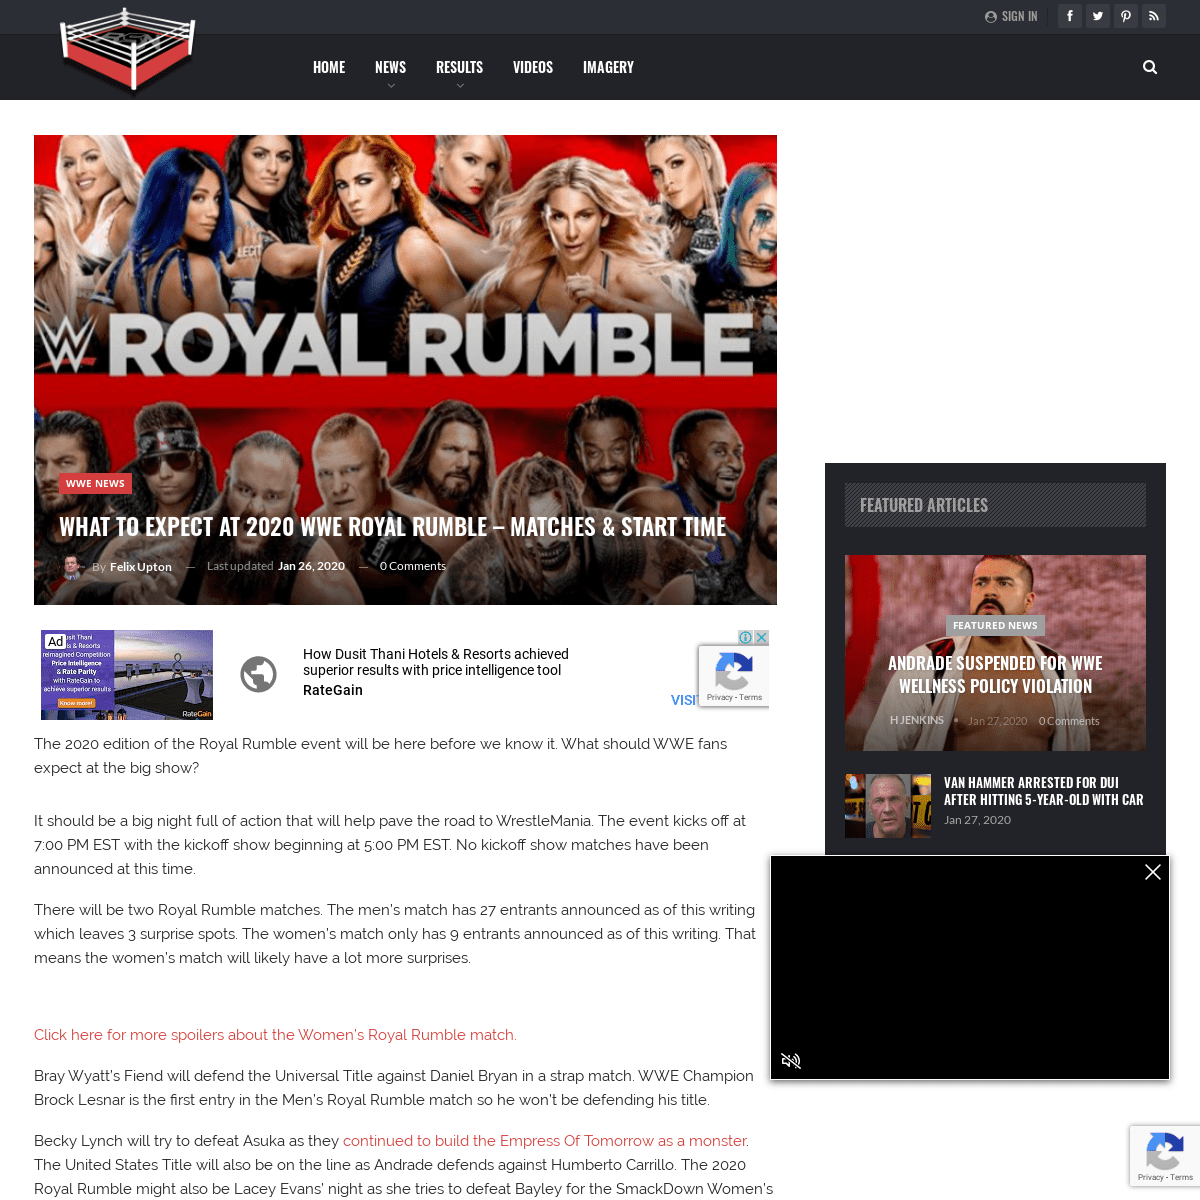 A complete backup of www.ringsidenews.com/2020/01/26/what-to-expect-at-2020-wwe-royal-rumble-matches-start-time/